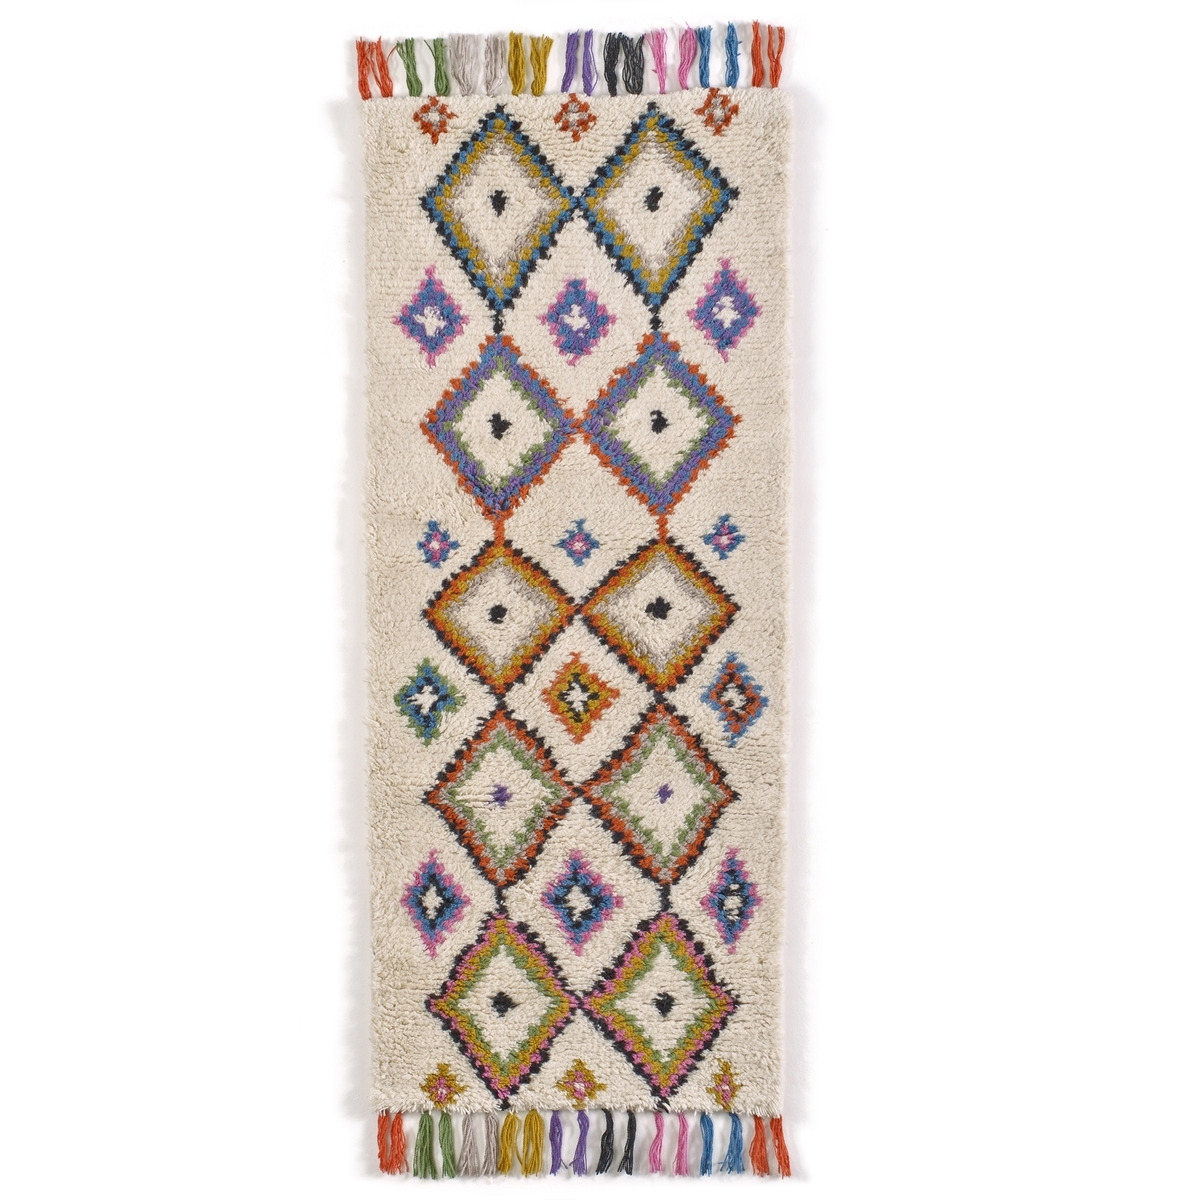 Ourika Berber-Style Colourful Wool Runner - image 1